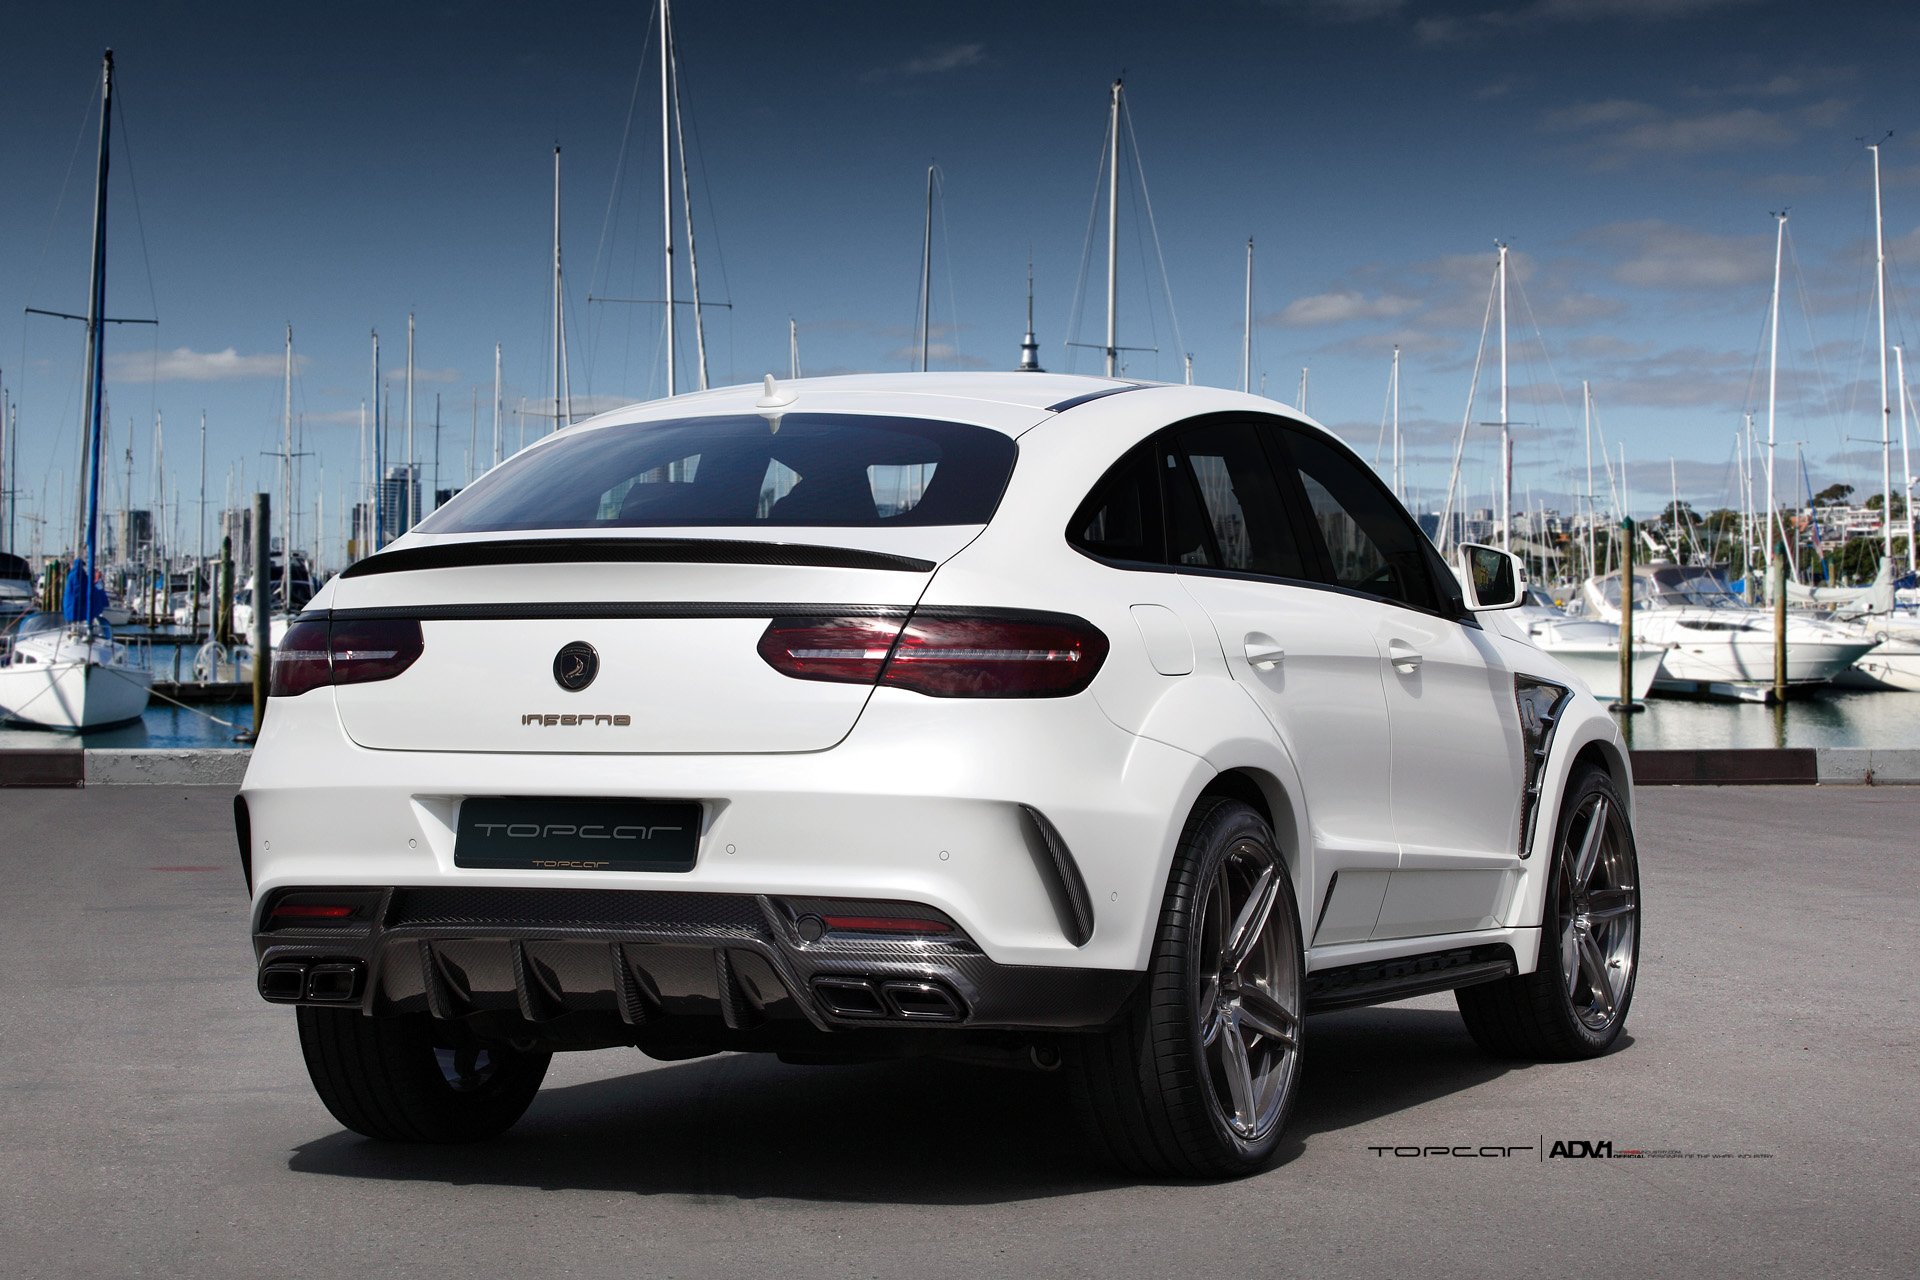 white, Mercedes, Benz, Gle, Adv1, Wheels, Cars, Suv Wallpapers HD